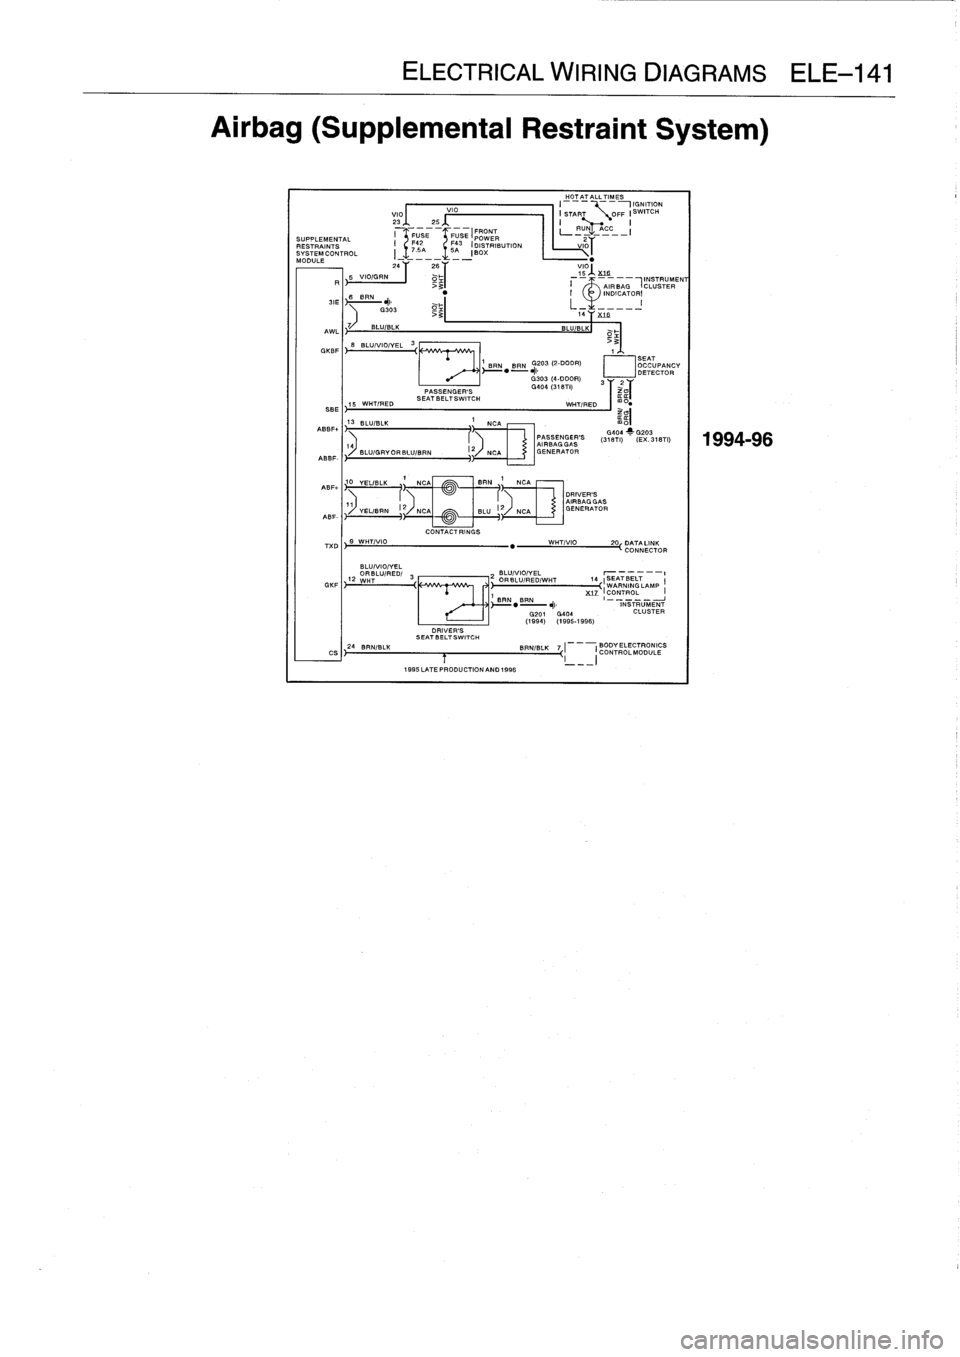 BMW 325i 1992 E36 Repair Manual 
ELECTRICAL
WIRING
DIAGRAMS
ELE-141

Airbag
(Supplemental
Restraint
System)

_
HO
_
TA
_
TALL
_
TIMES
I

	

IGNITION
VIO

	

VIO

	

I
START

	

OFF
!SWITCH
23
__
25
___

	

I

	

!
~`

	

(FRONT

	

